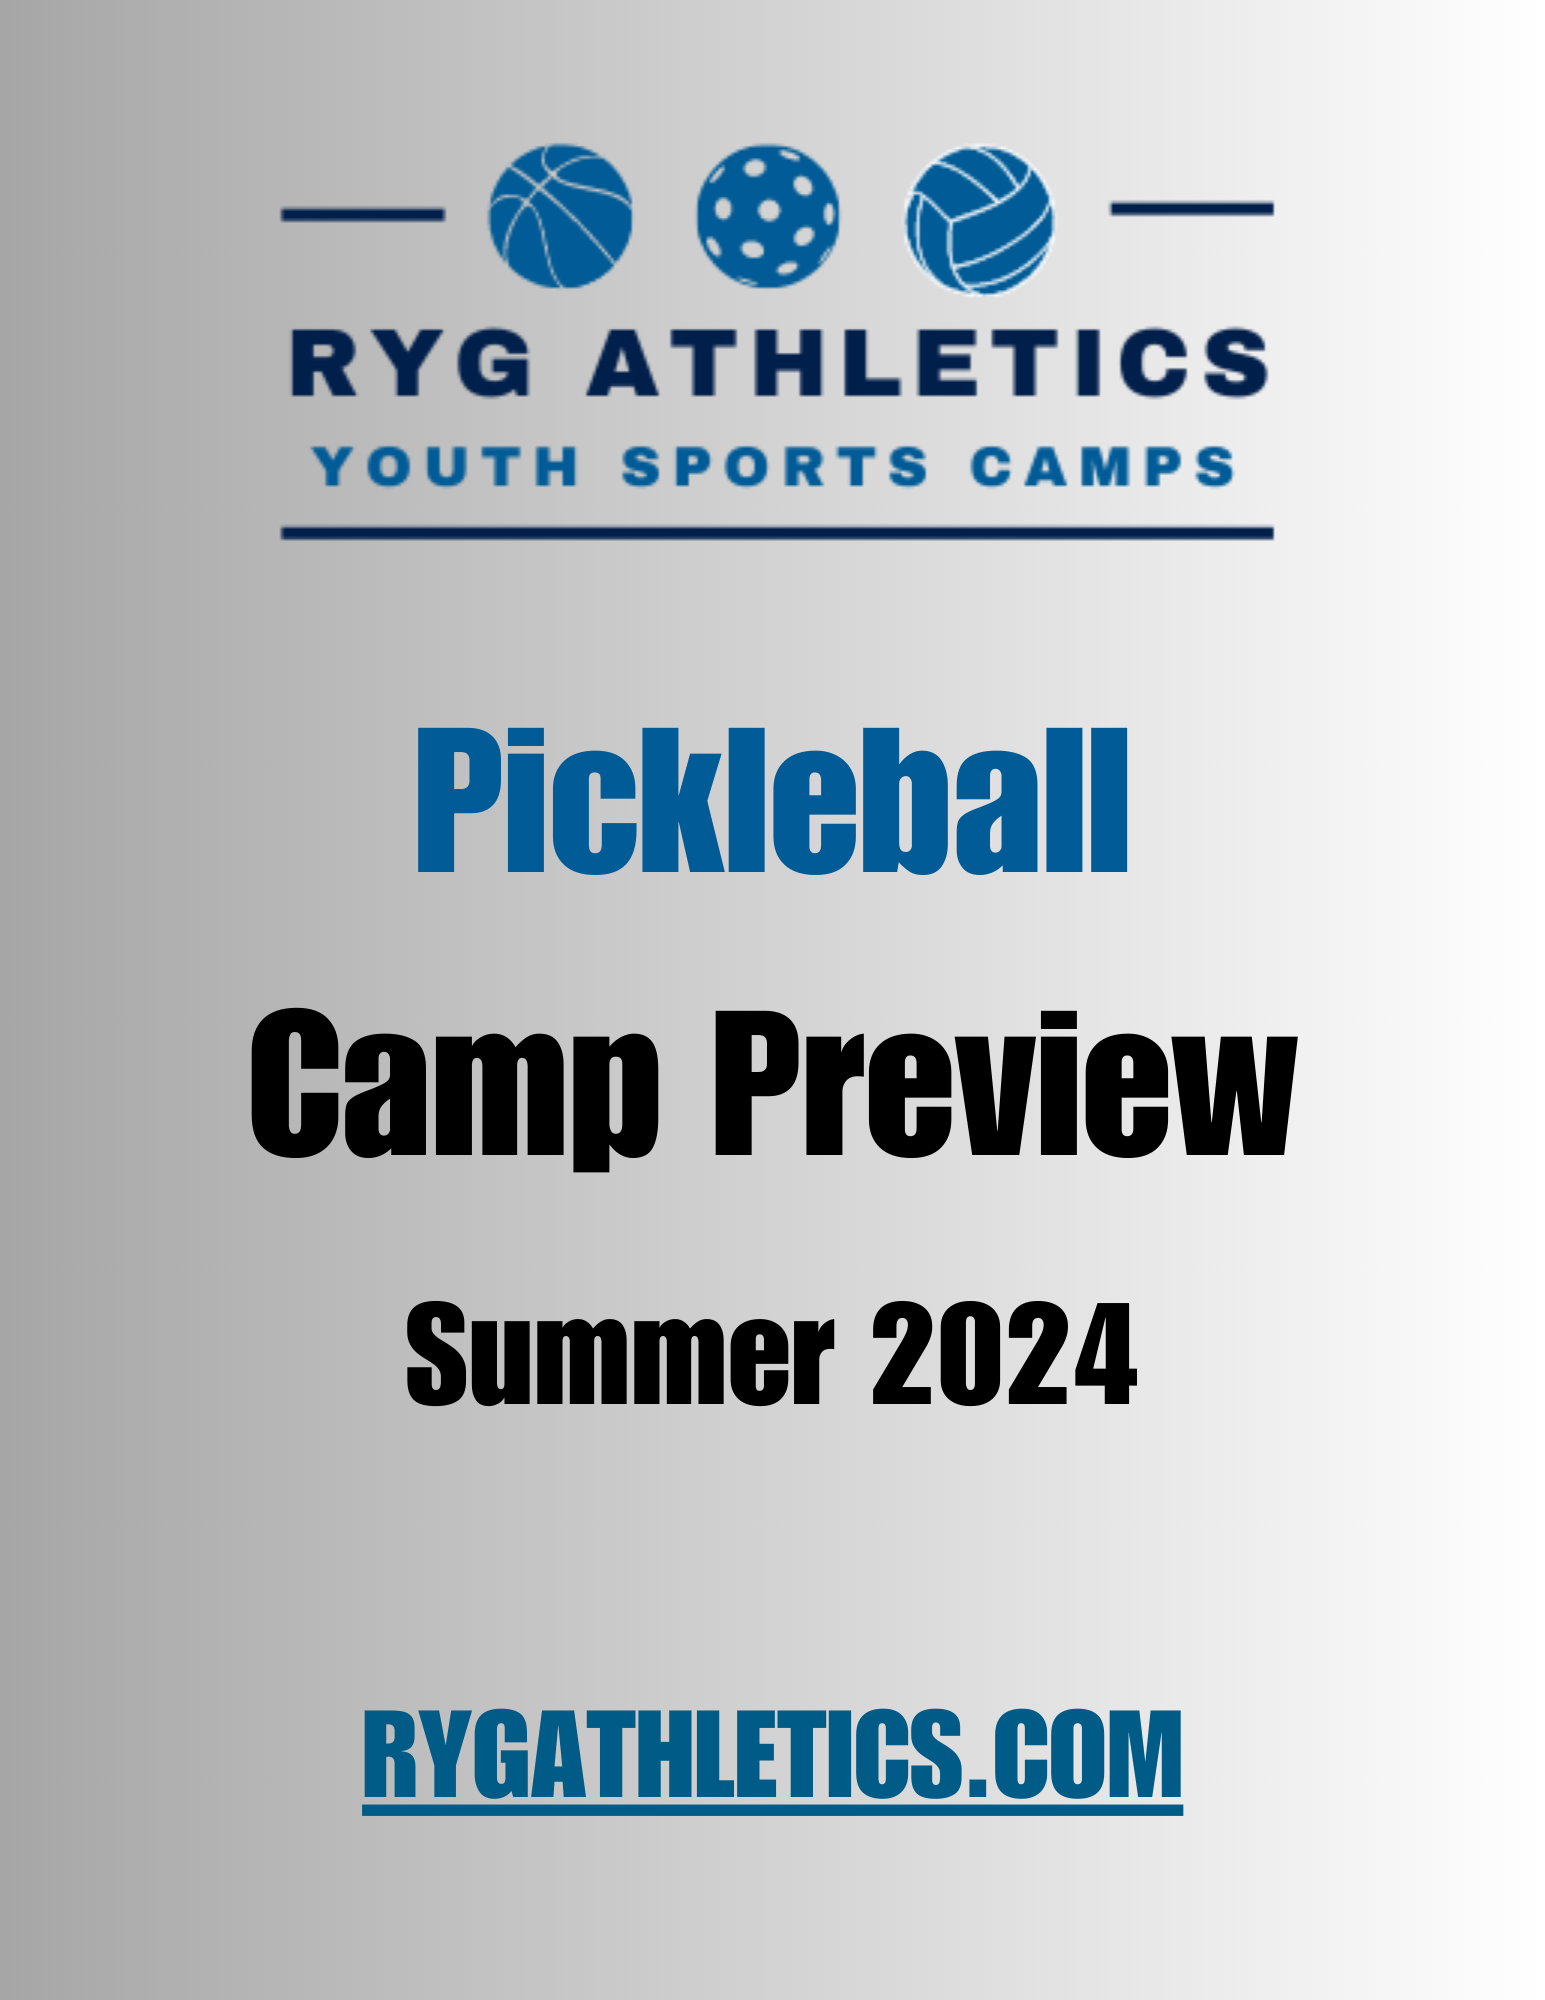 Pickleball Camp Preview - Summer 2024